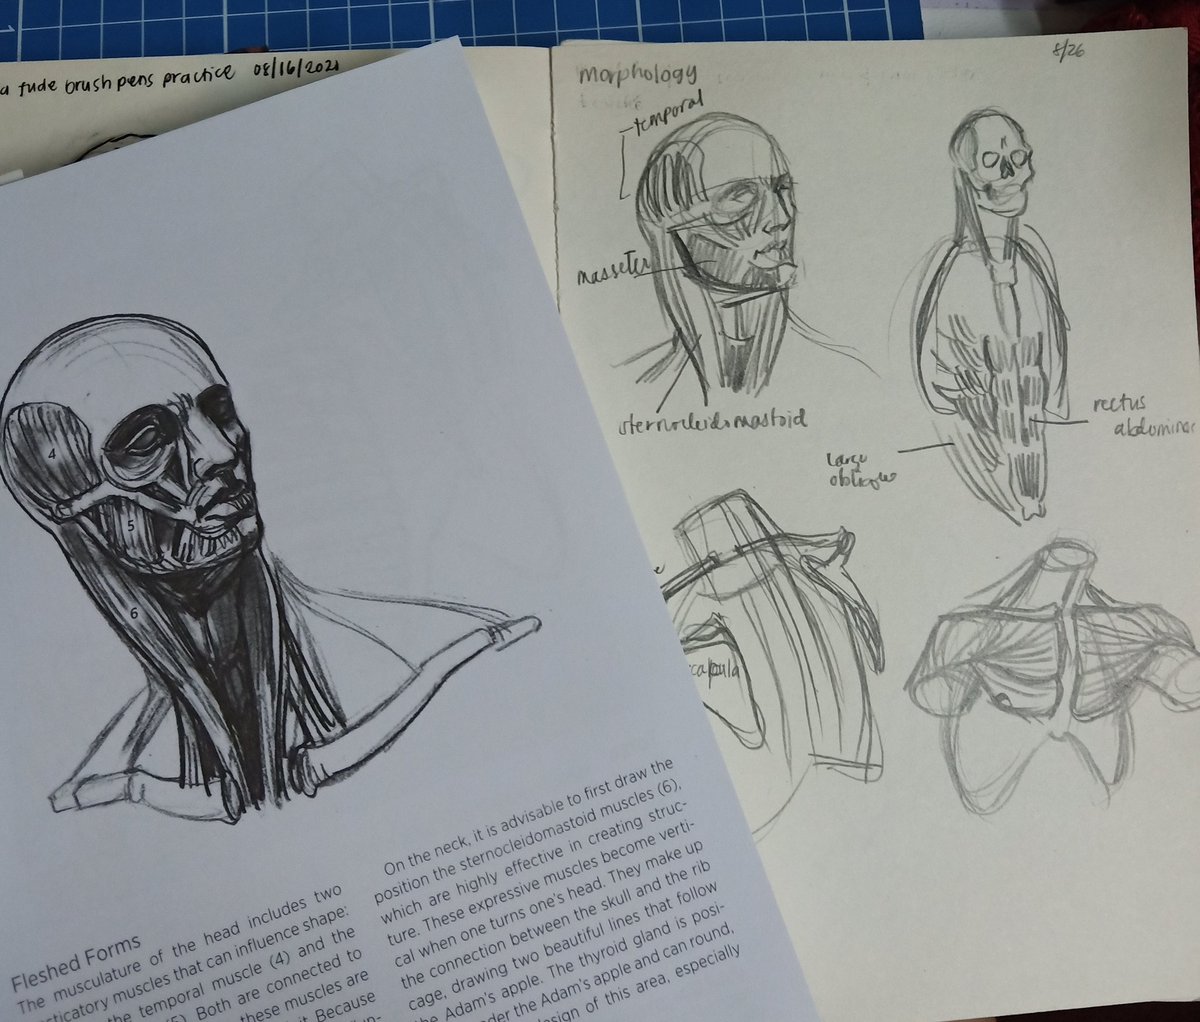 I'm learning how to draw Titans jk. It's more of understanding anatomy... and I hope I'm learning something by copying them hehe

Book: Morpho Anatomy for Artists by Michel Lauricella 